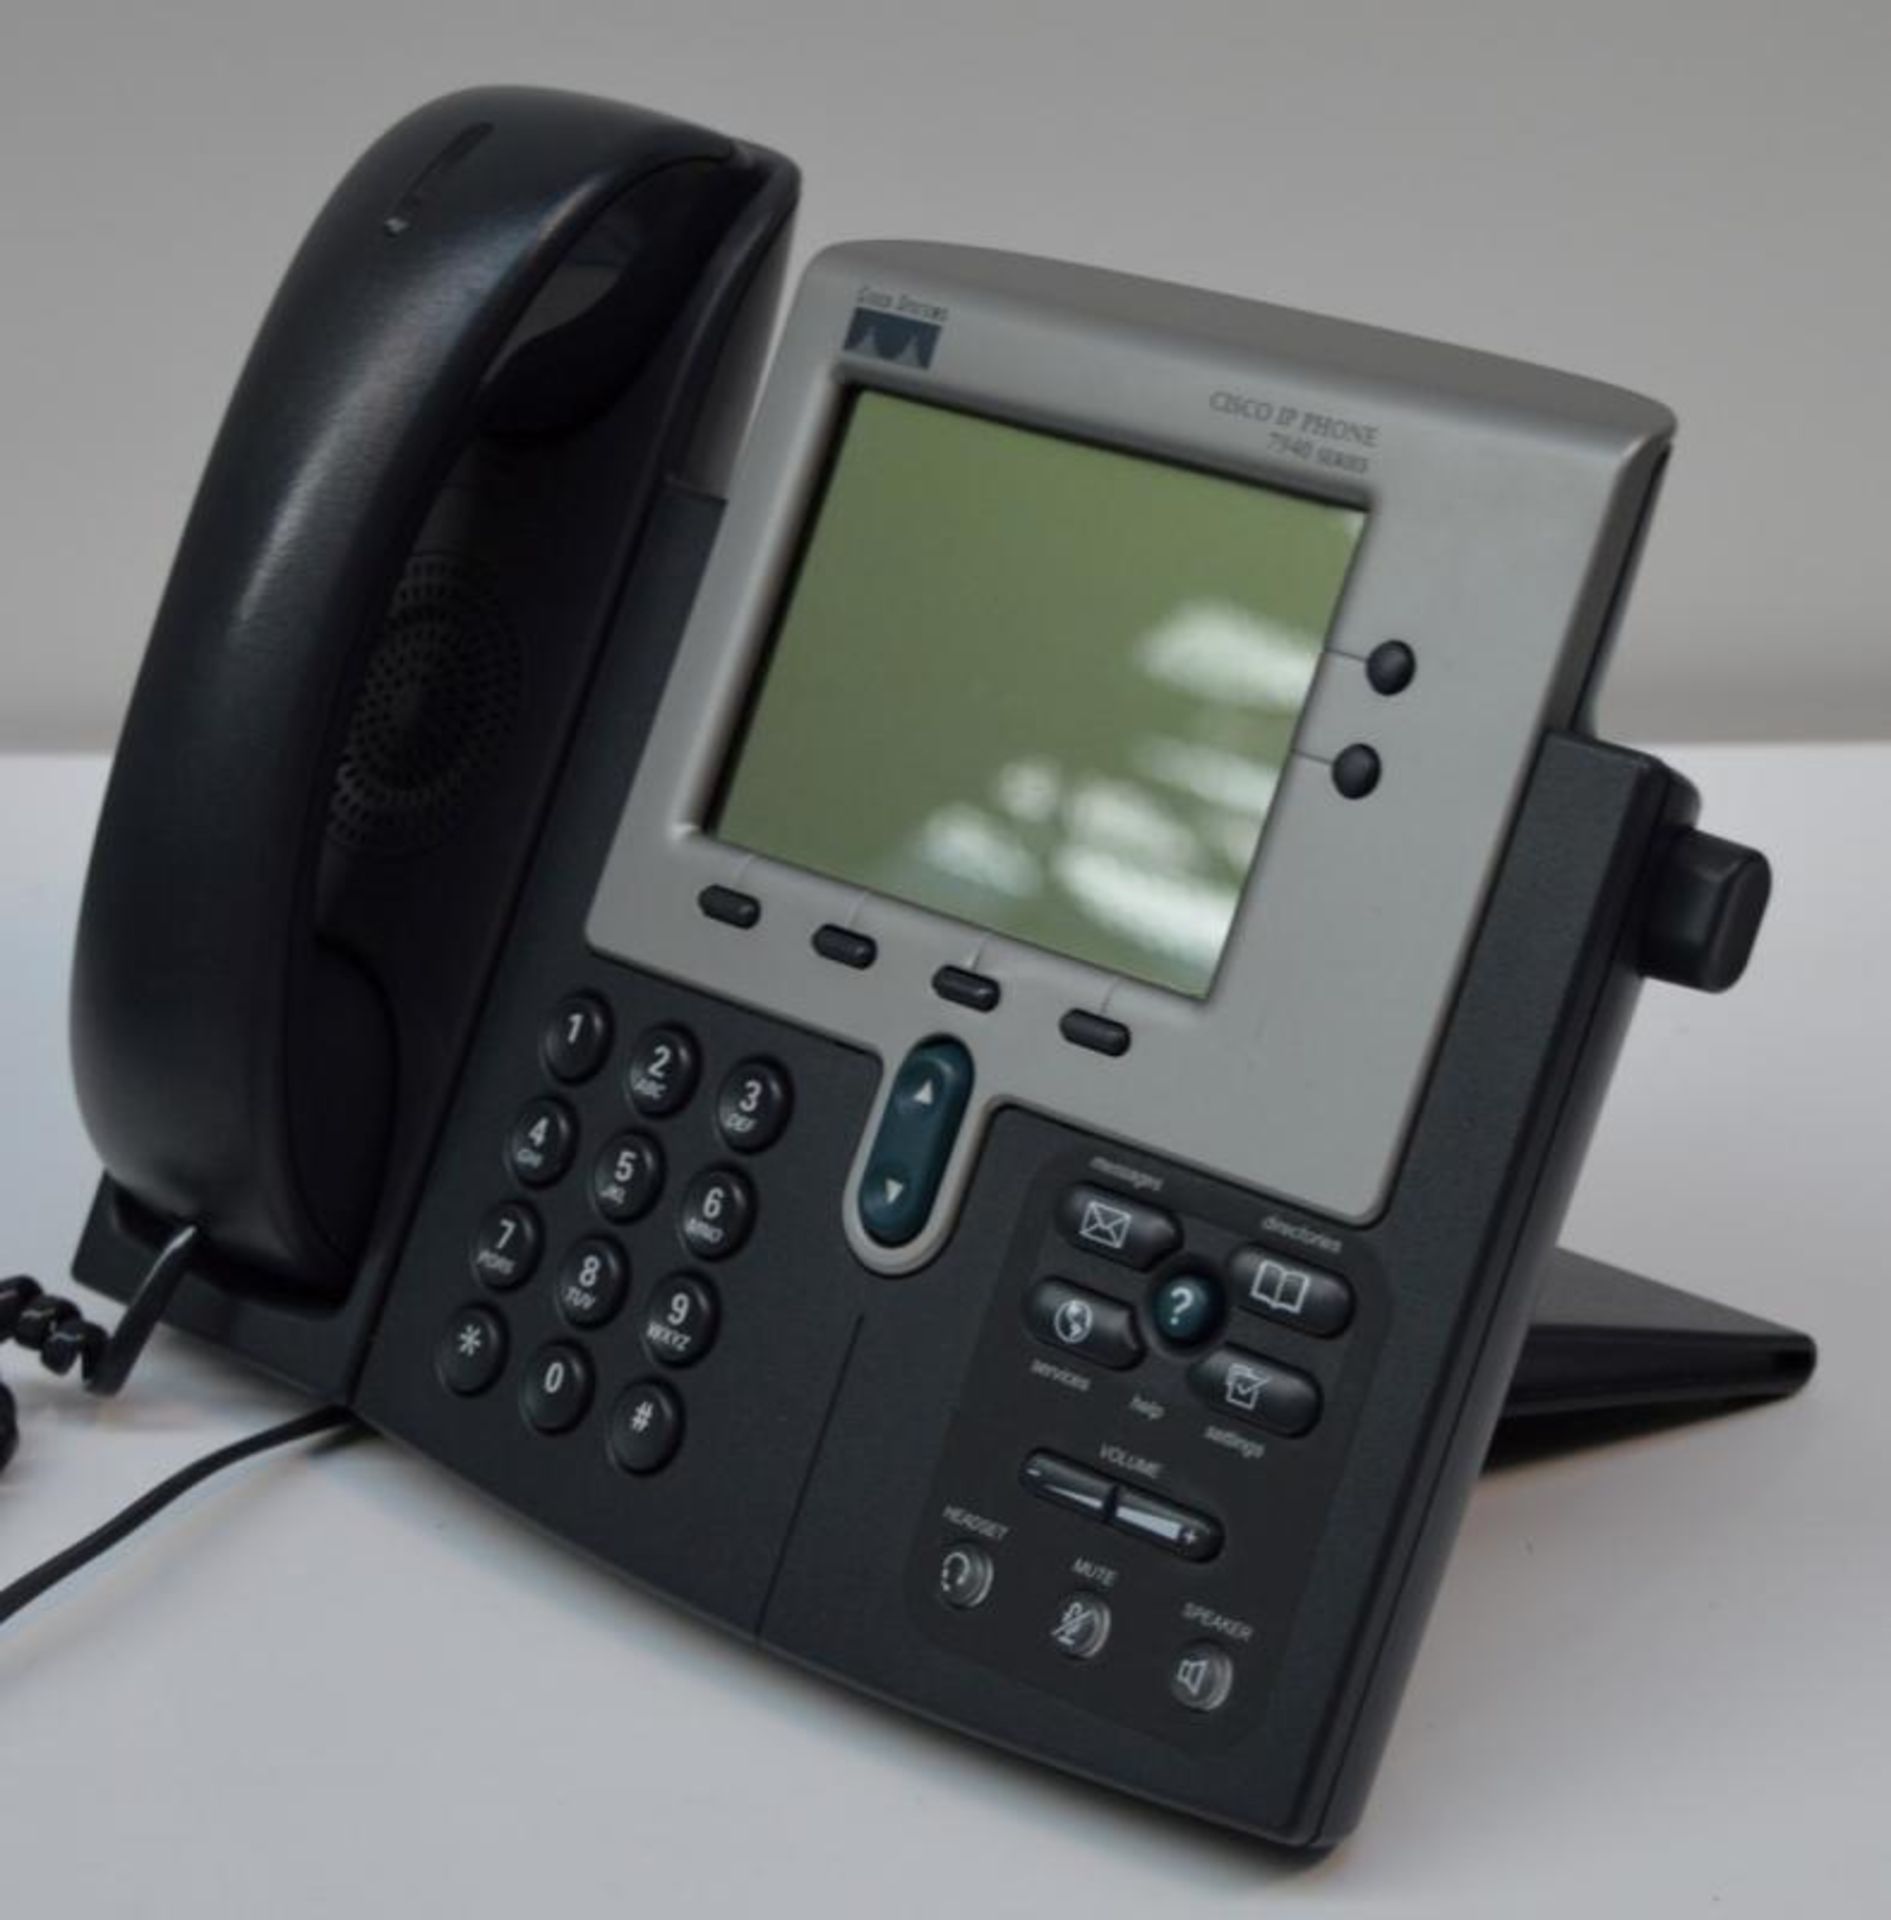 4 x Cisco CP-7940G IP Phone VOIP Telephone LCD Display Phones - Removed From a Working Office Enviro - Image 3 of 6